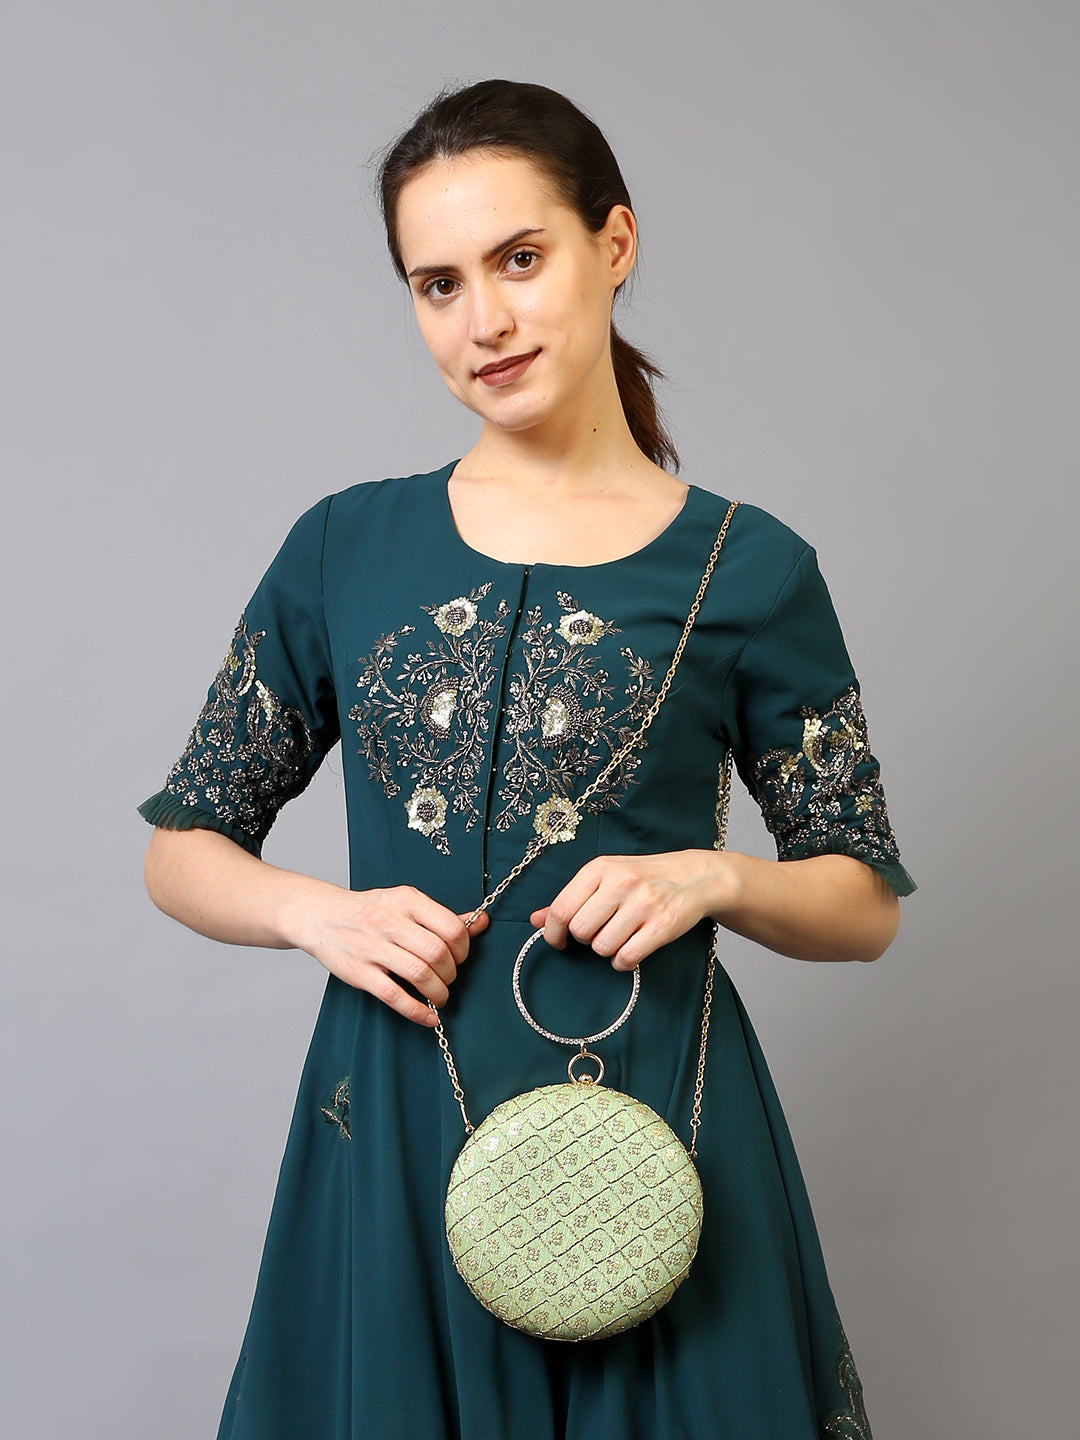 Filauri Round Shaped Ethnic Sling Clutch Bag Green